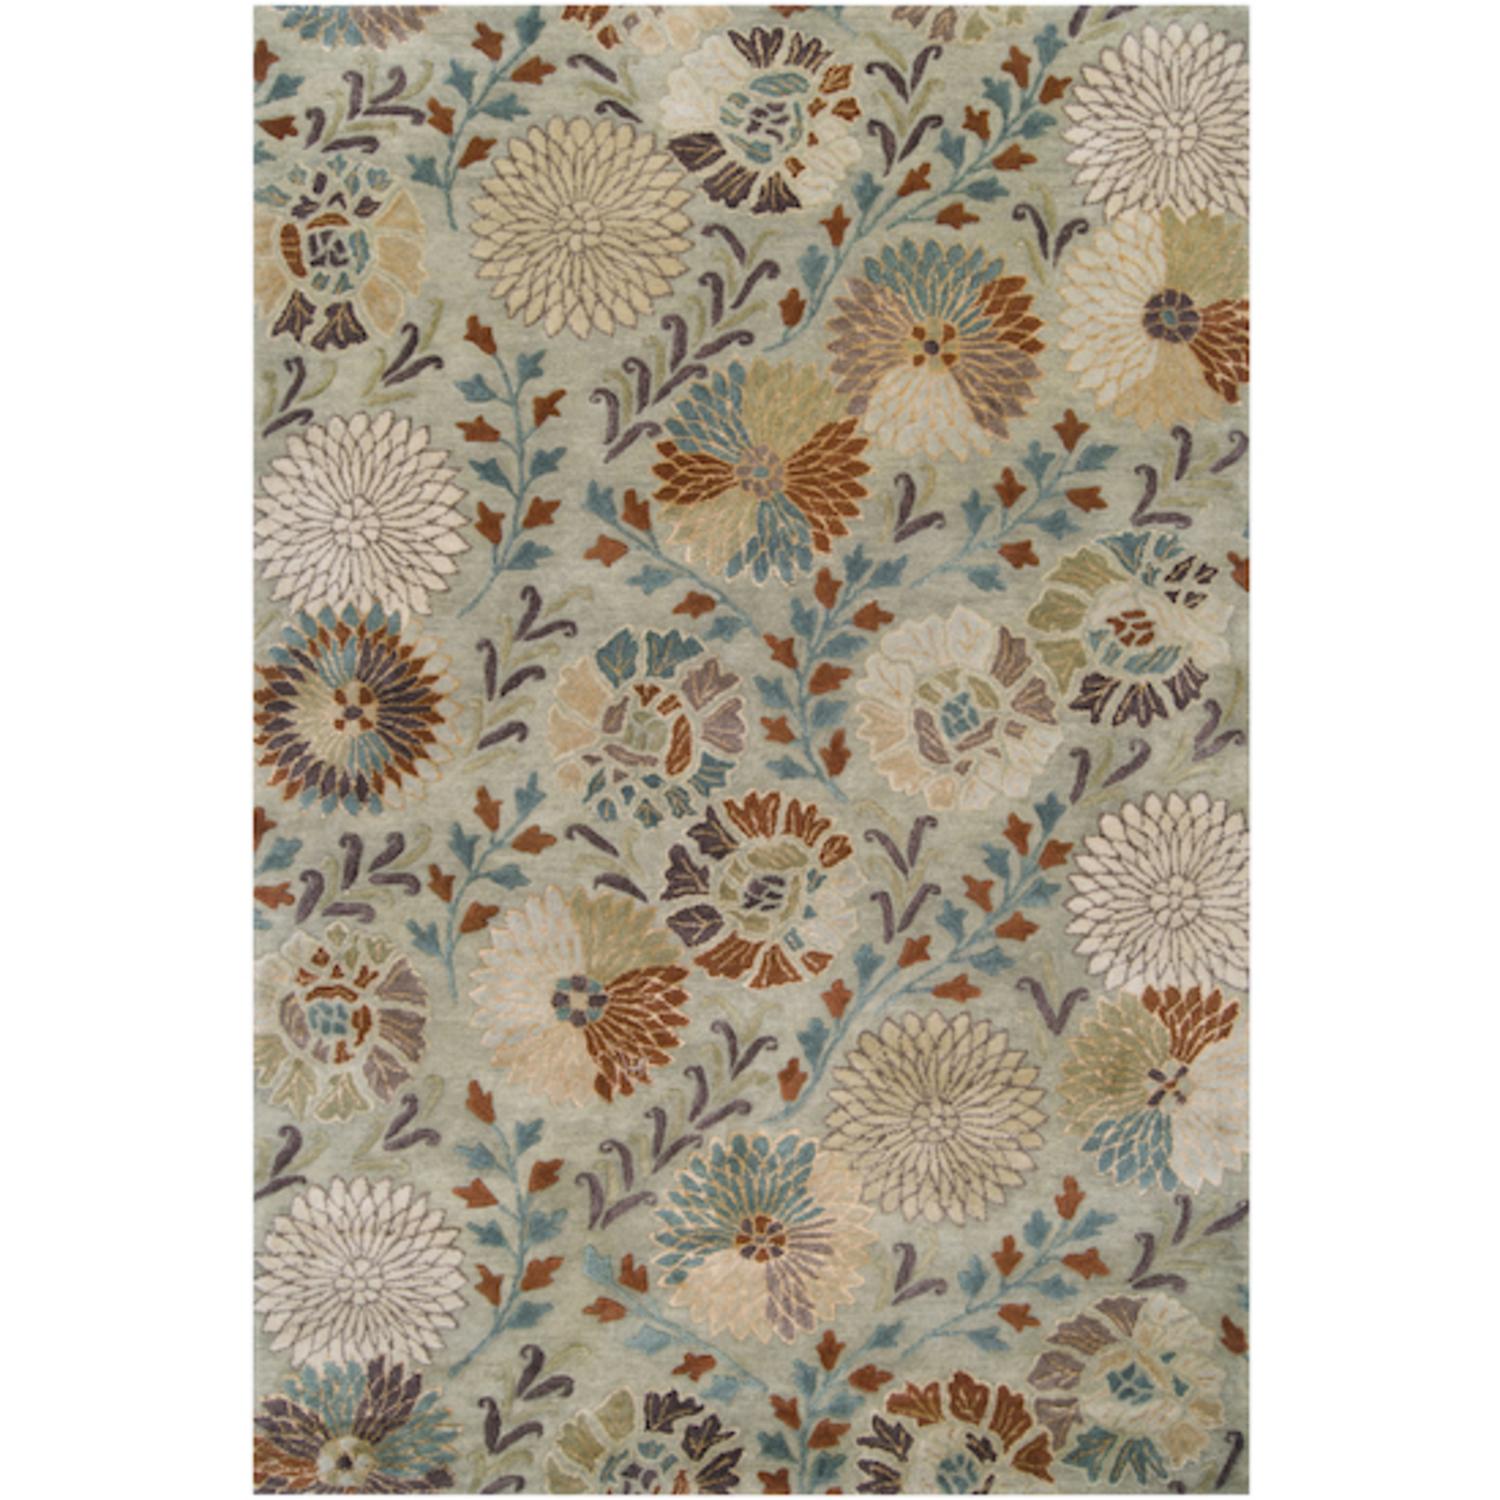 CC Home Furnishings 8' x 11' Vintage Garden Pale Gold, Sage Green and Tan Rectangular Wool Area Rug